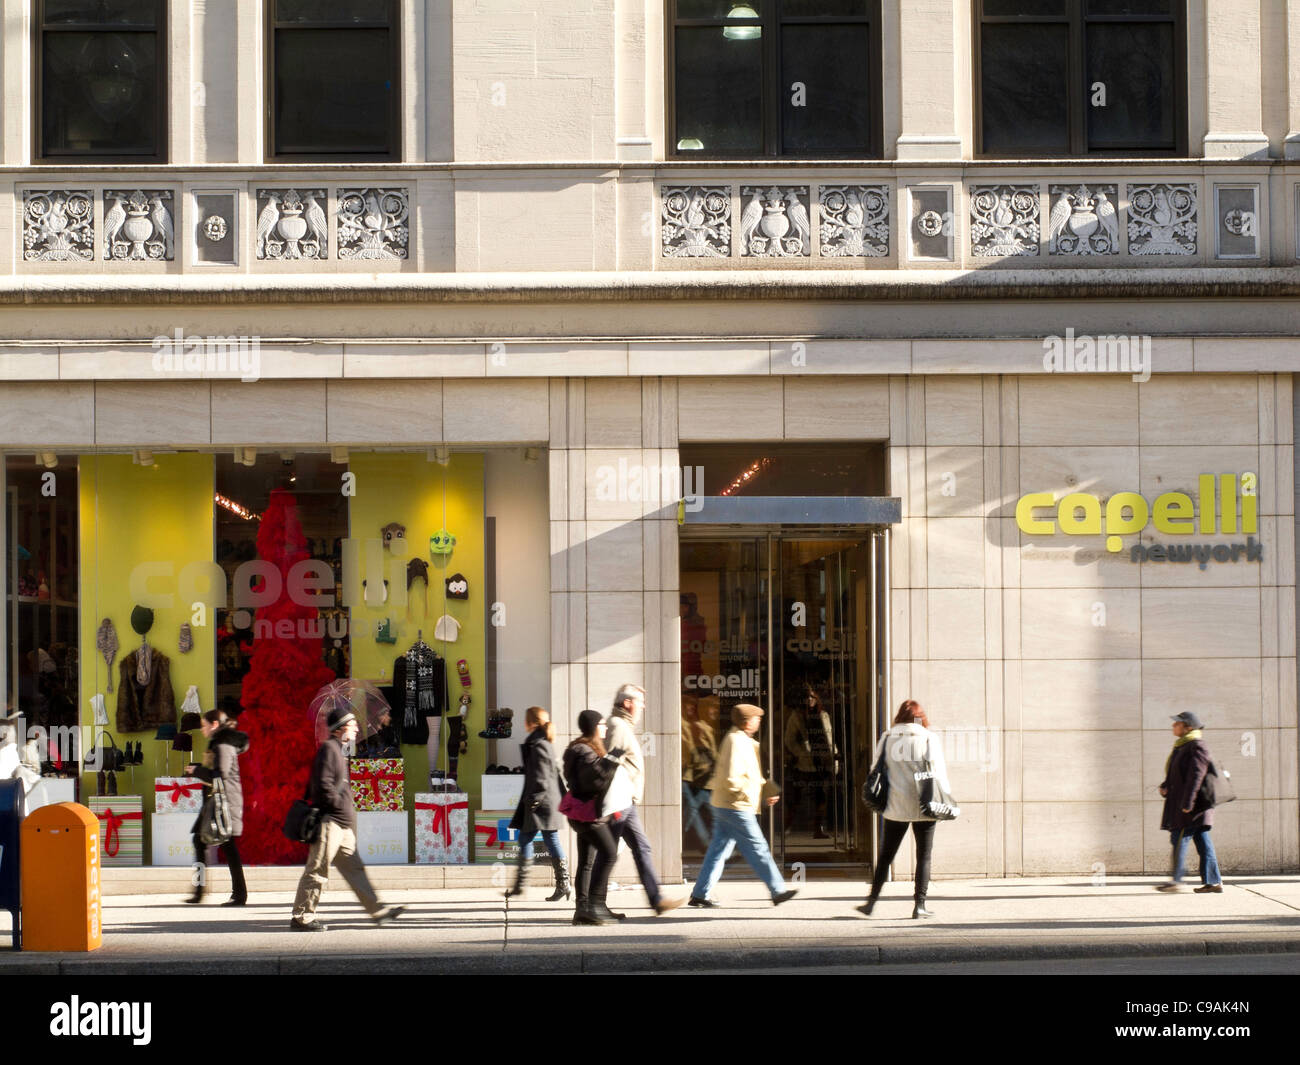 Capelli New York, Clothing Store Facade, Fifth Avenue, NYC Stock Photo -  Alamy